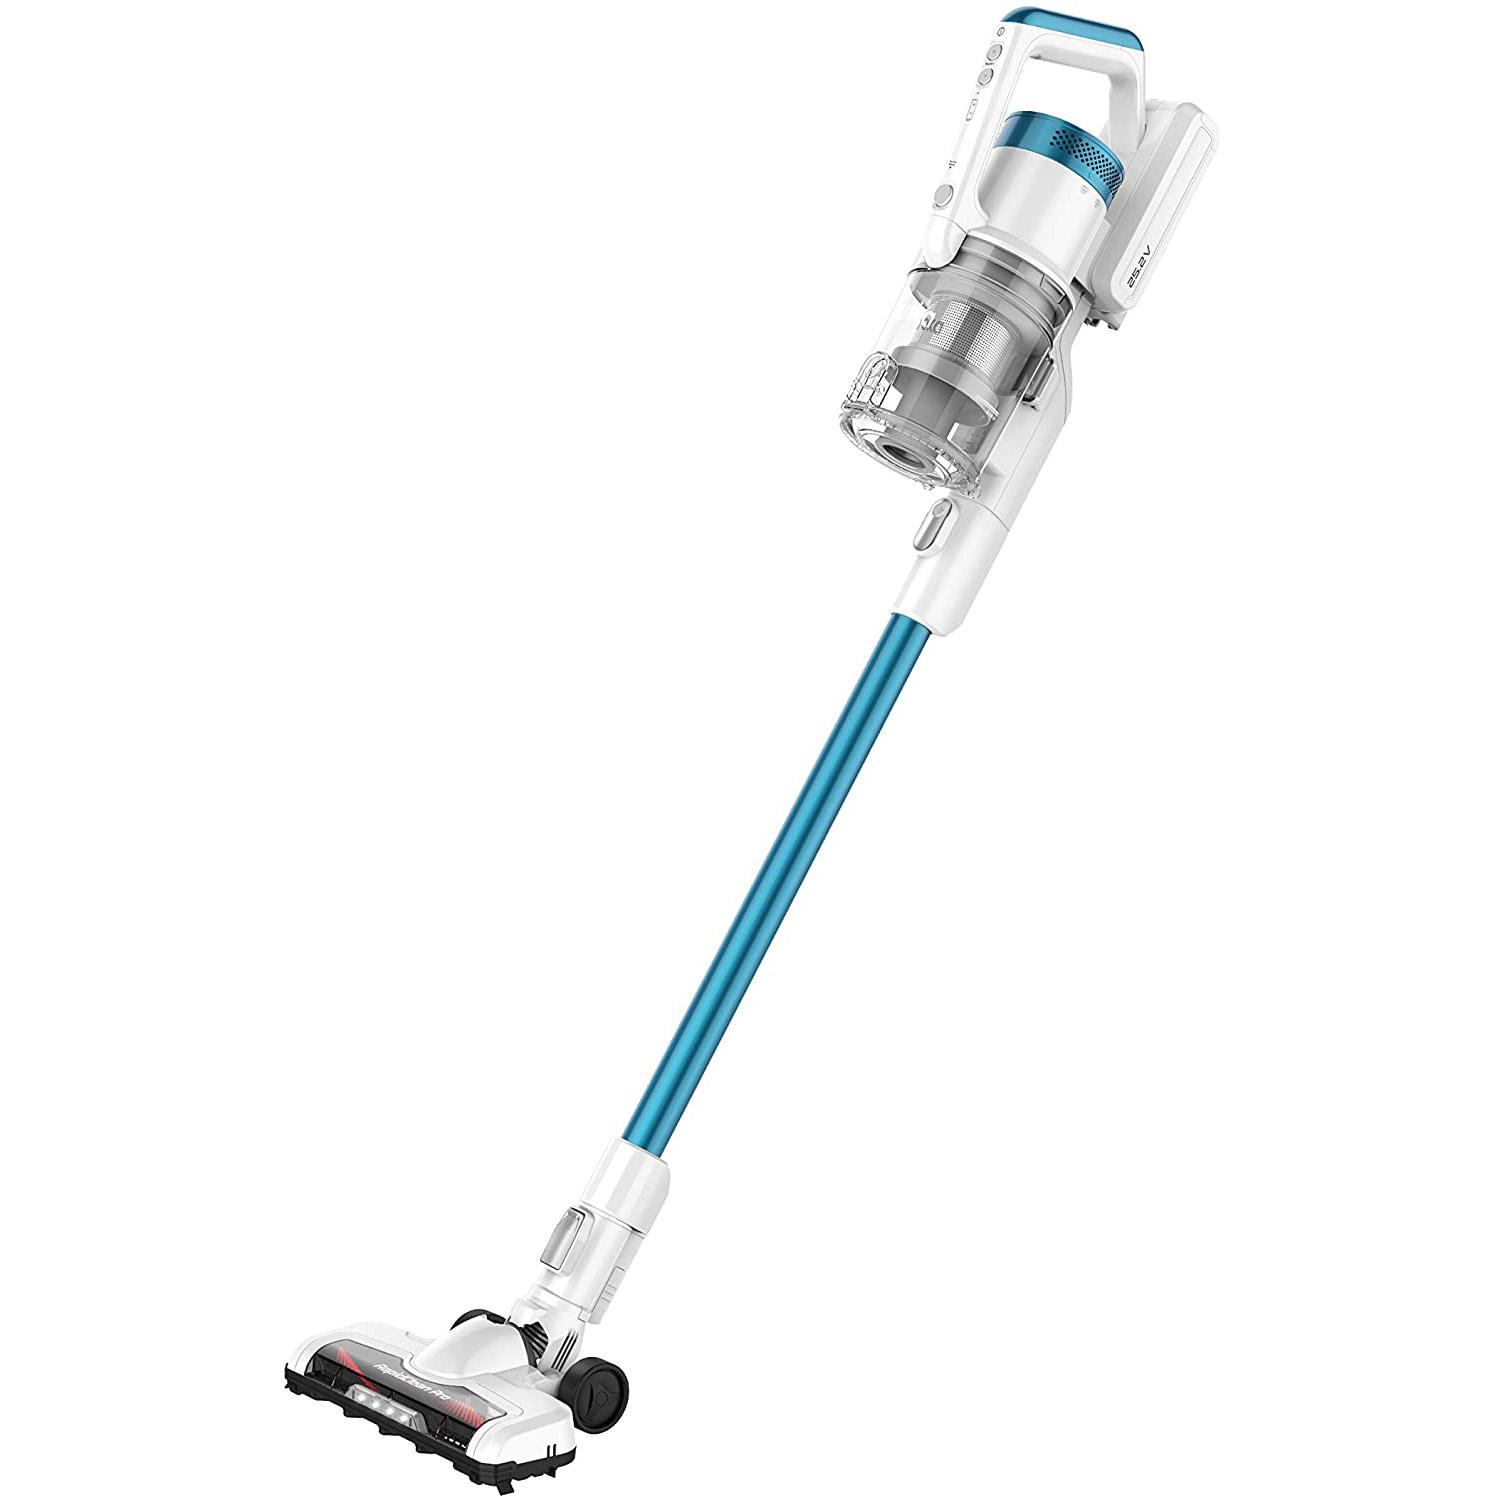 Eureka RapidClean Pro Lightweight Cordless Vacuum Cleaner for $99.99 Shipped